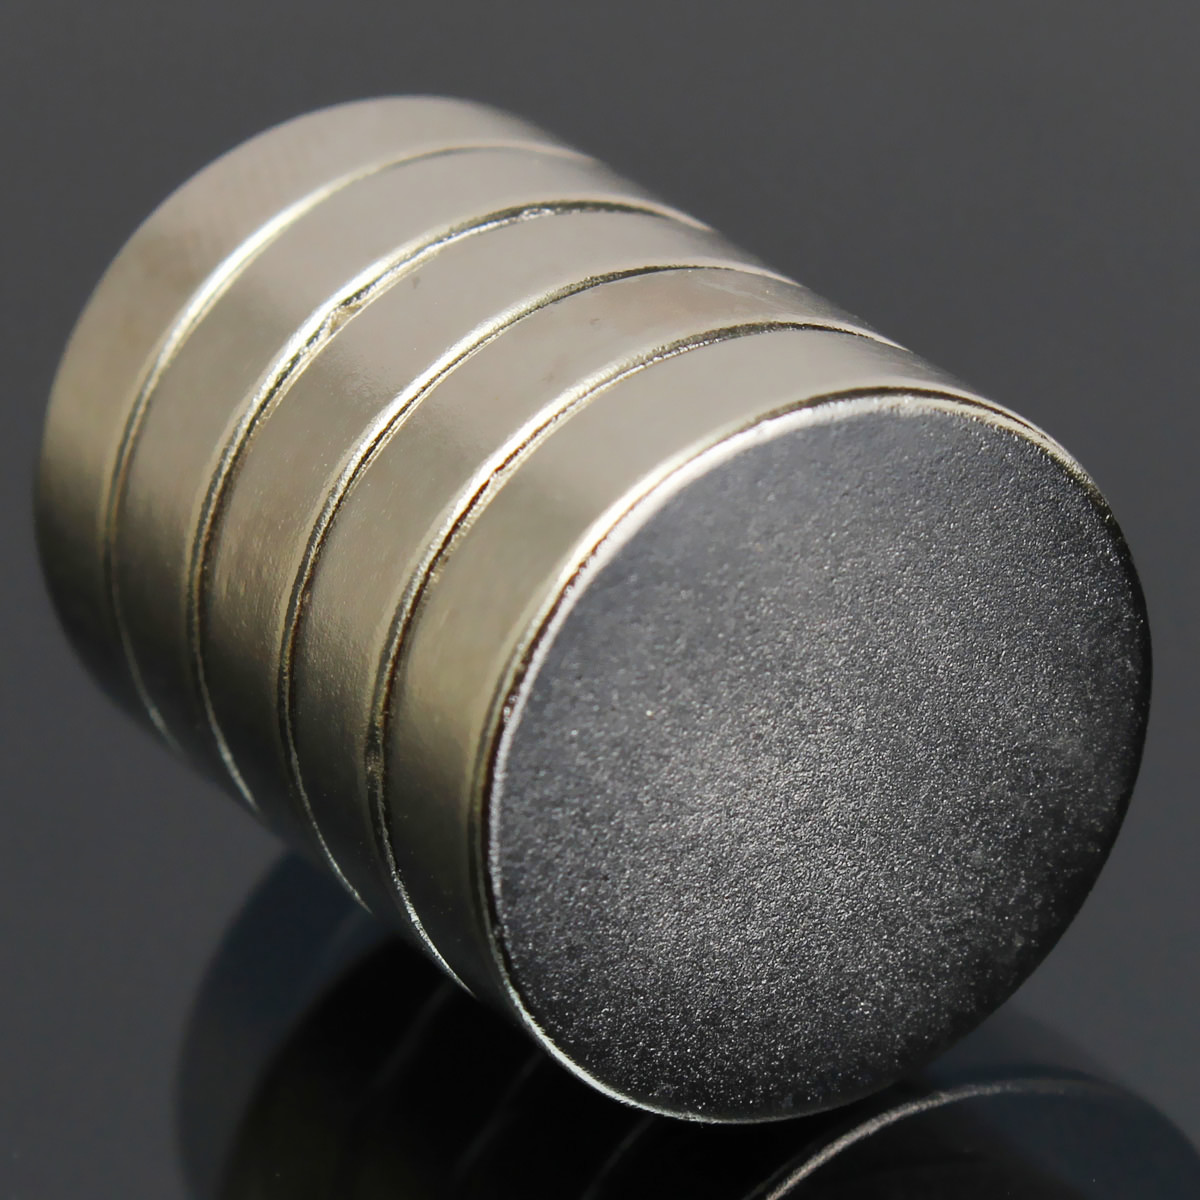 5pcs N50 20 x 5mm Strong Cylinder Round Magnets Rare Earth Neodymium ...